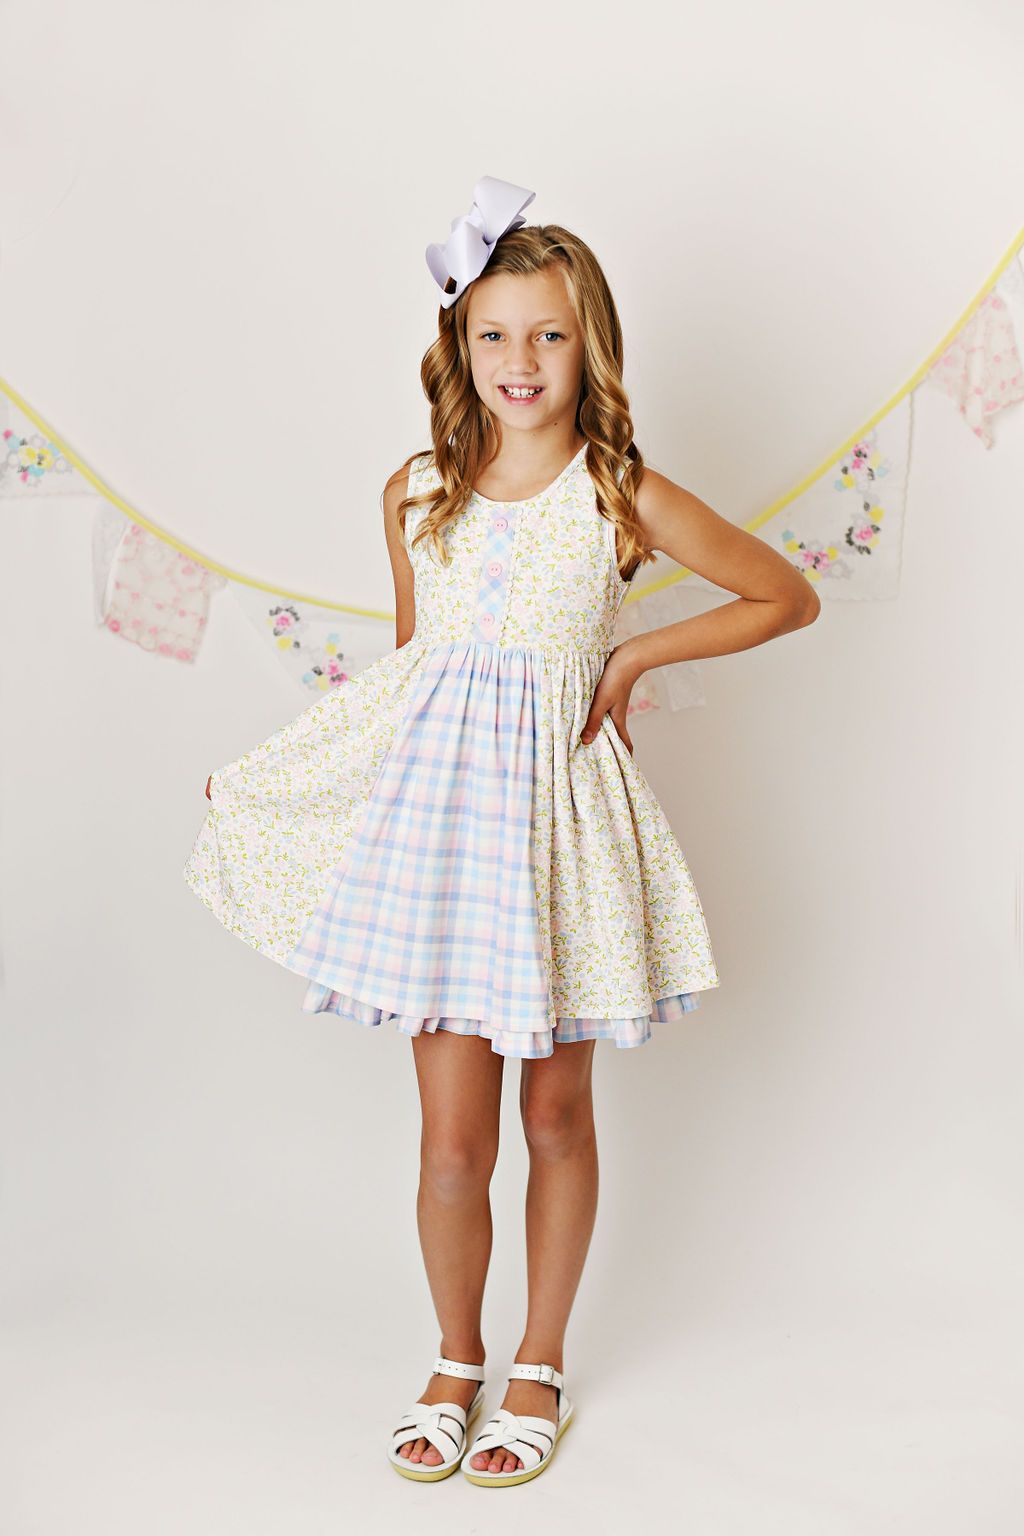 Serendipity Clothing Co. Springtime Blues Layered Tier Dress